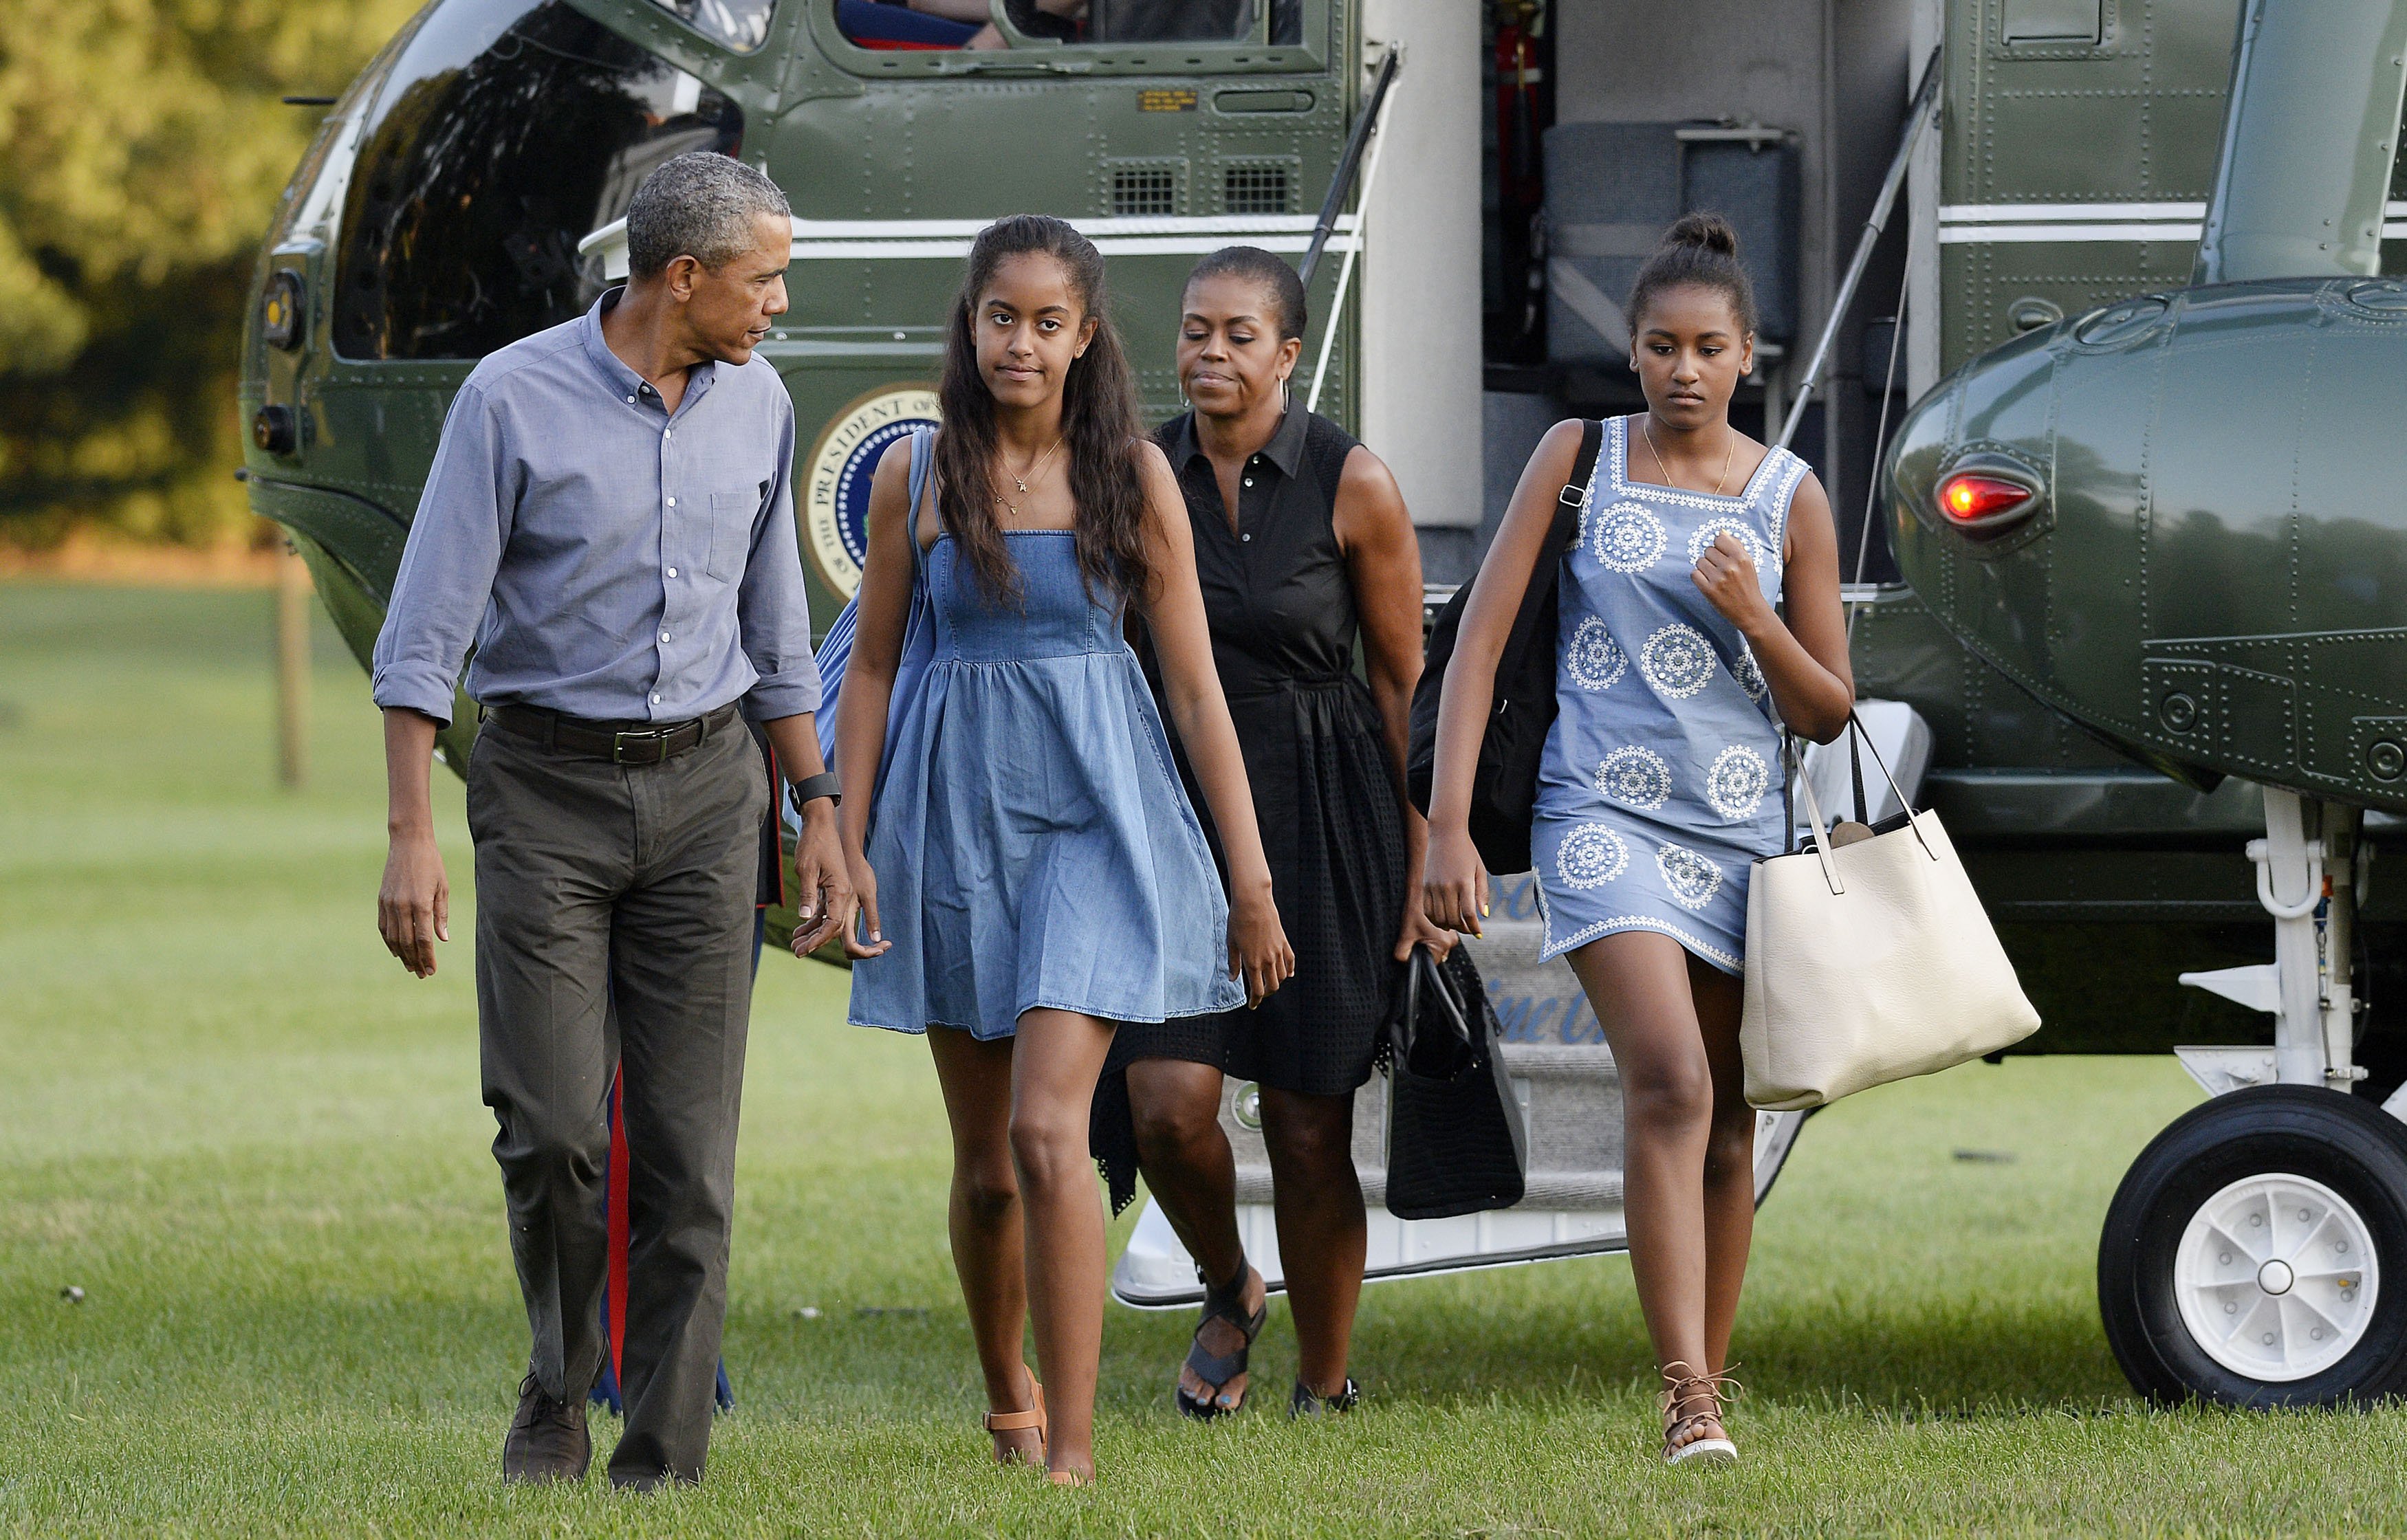  Barack and Michelle Obama, and daughters Sasha and Malia, arrive at the White House August 23, 2015 in Washington, D.C. | Photo: GettyImages